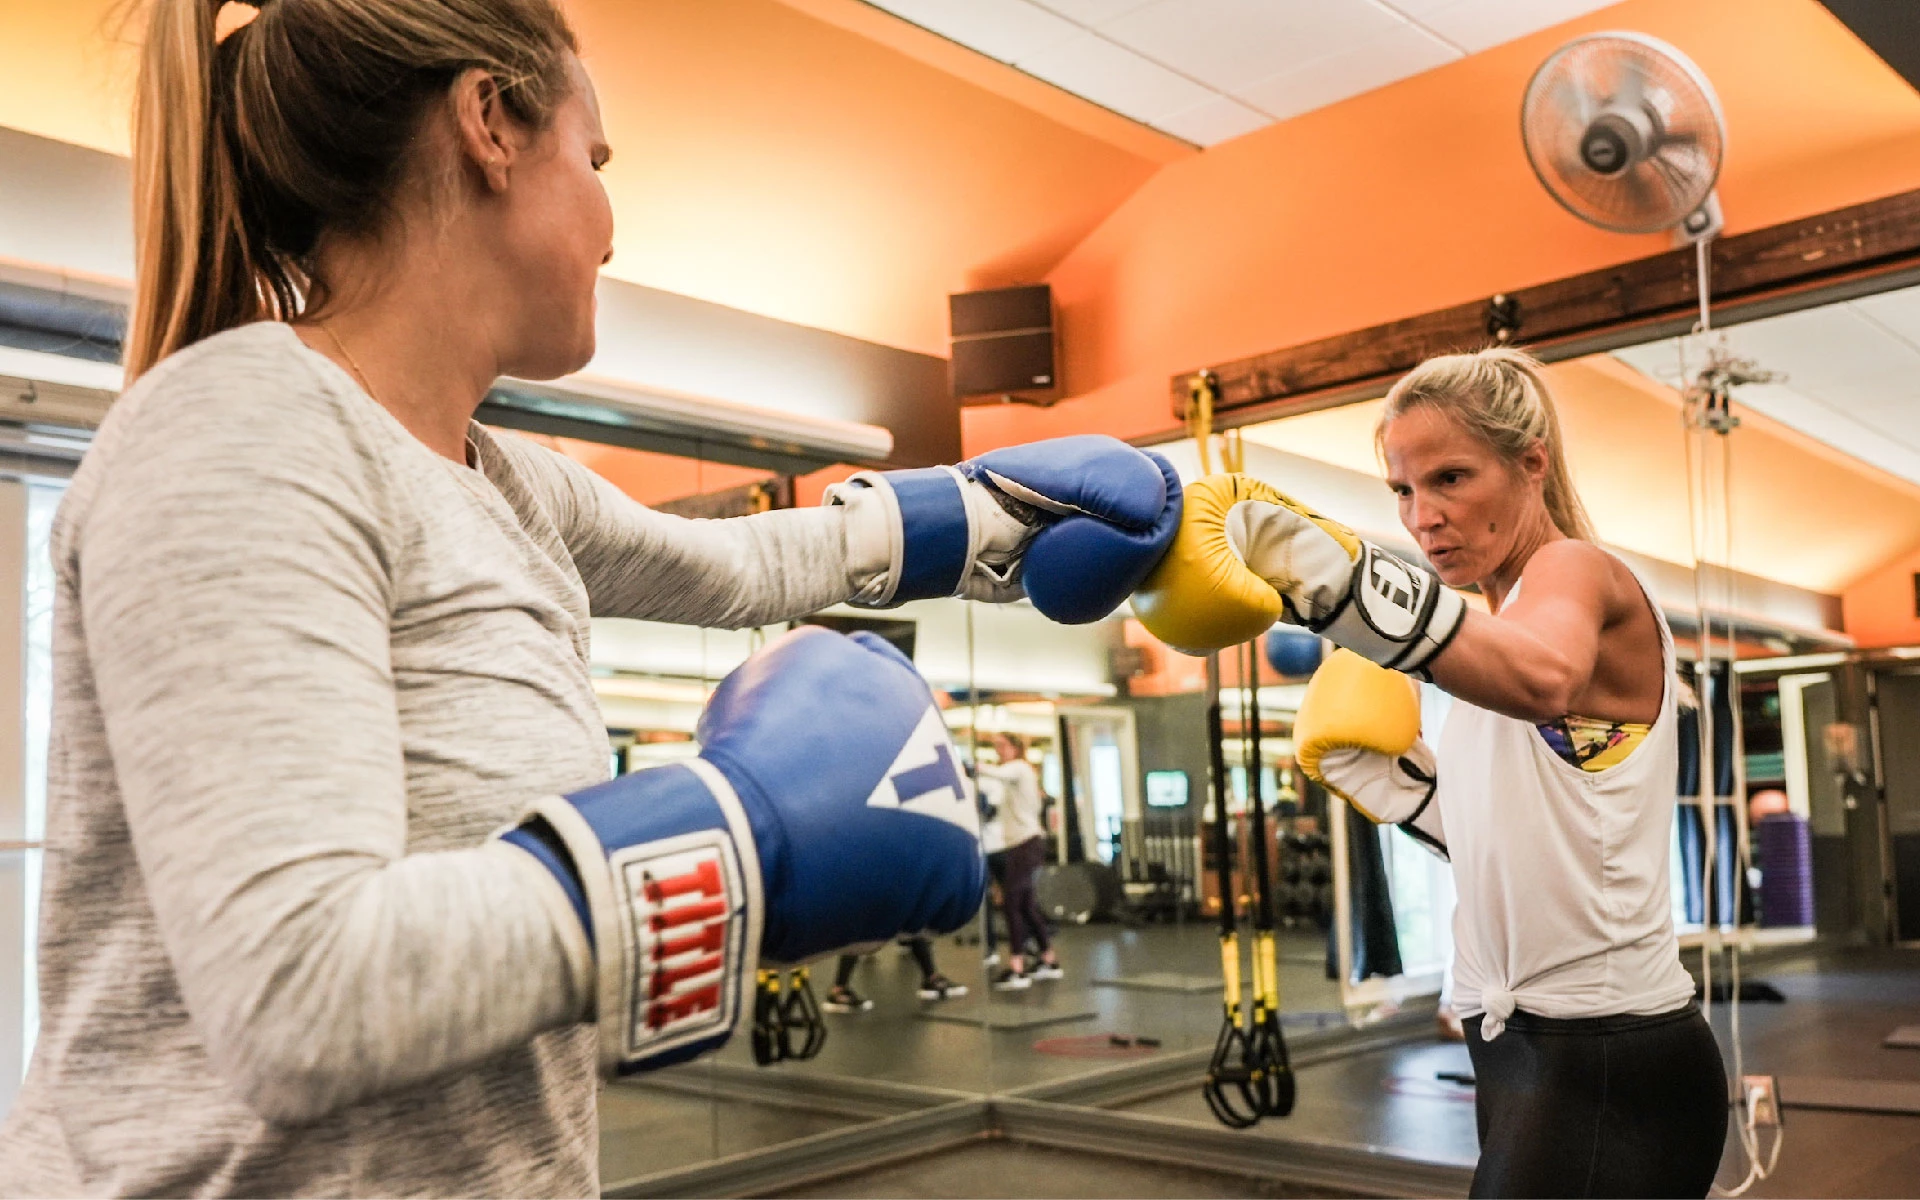 Westlake Country Club members boxing at the fitness center